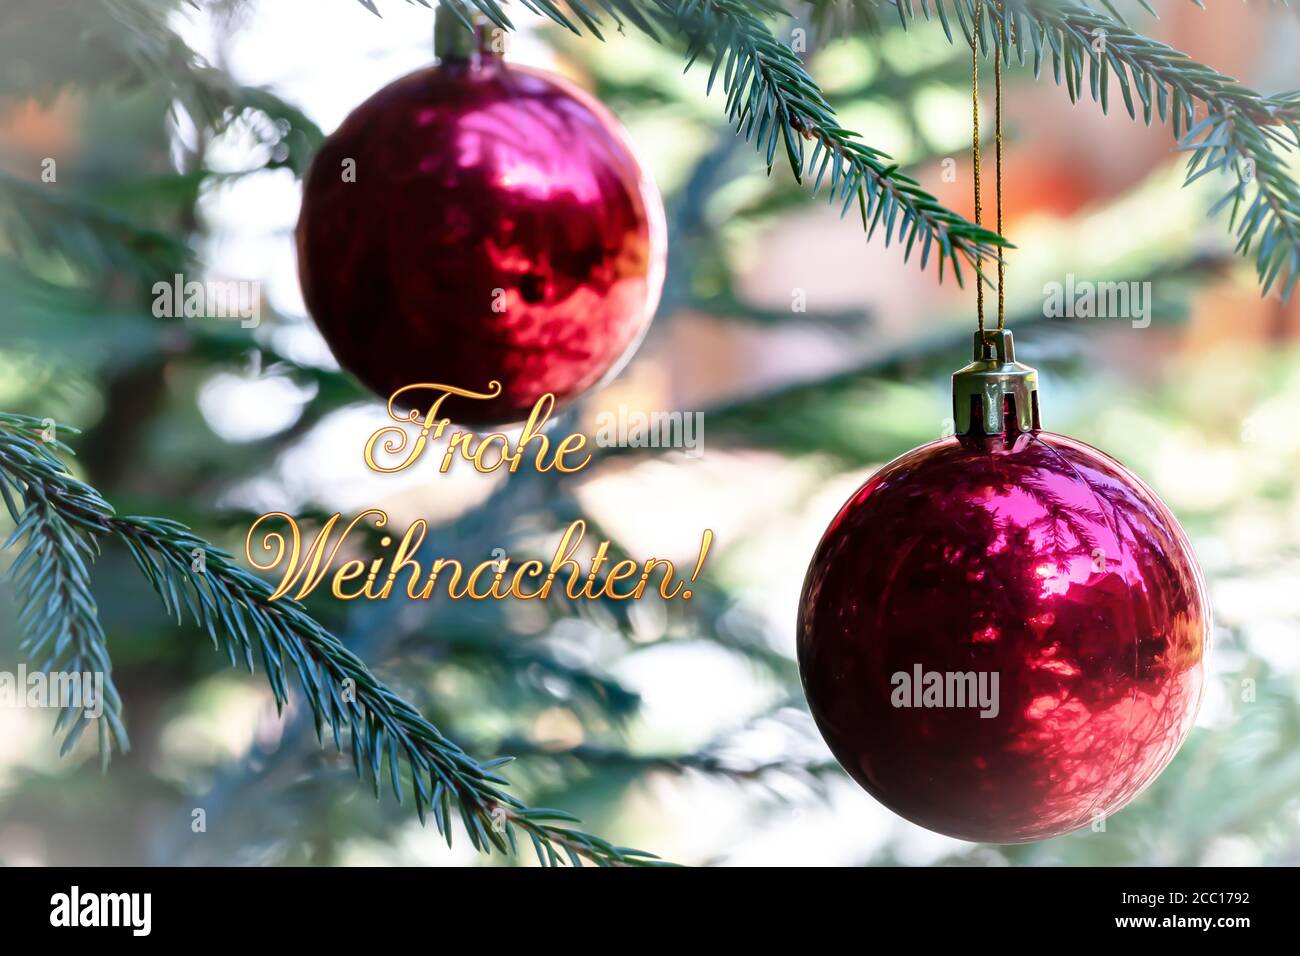 german words frohe weihnachten, which means merry christmas, red Christmas balls with reflection decorate the green branches of the Christmas tree. Stock Photo